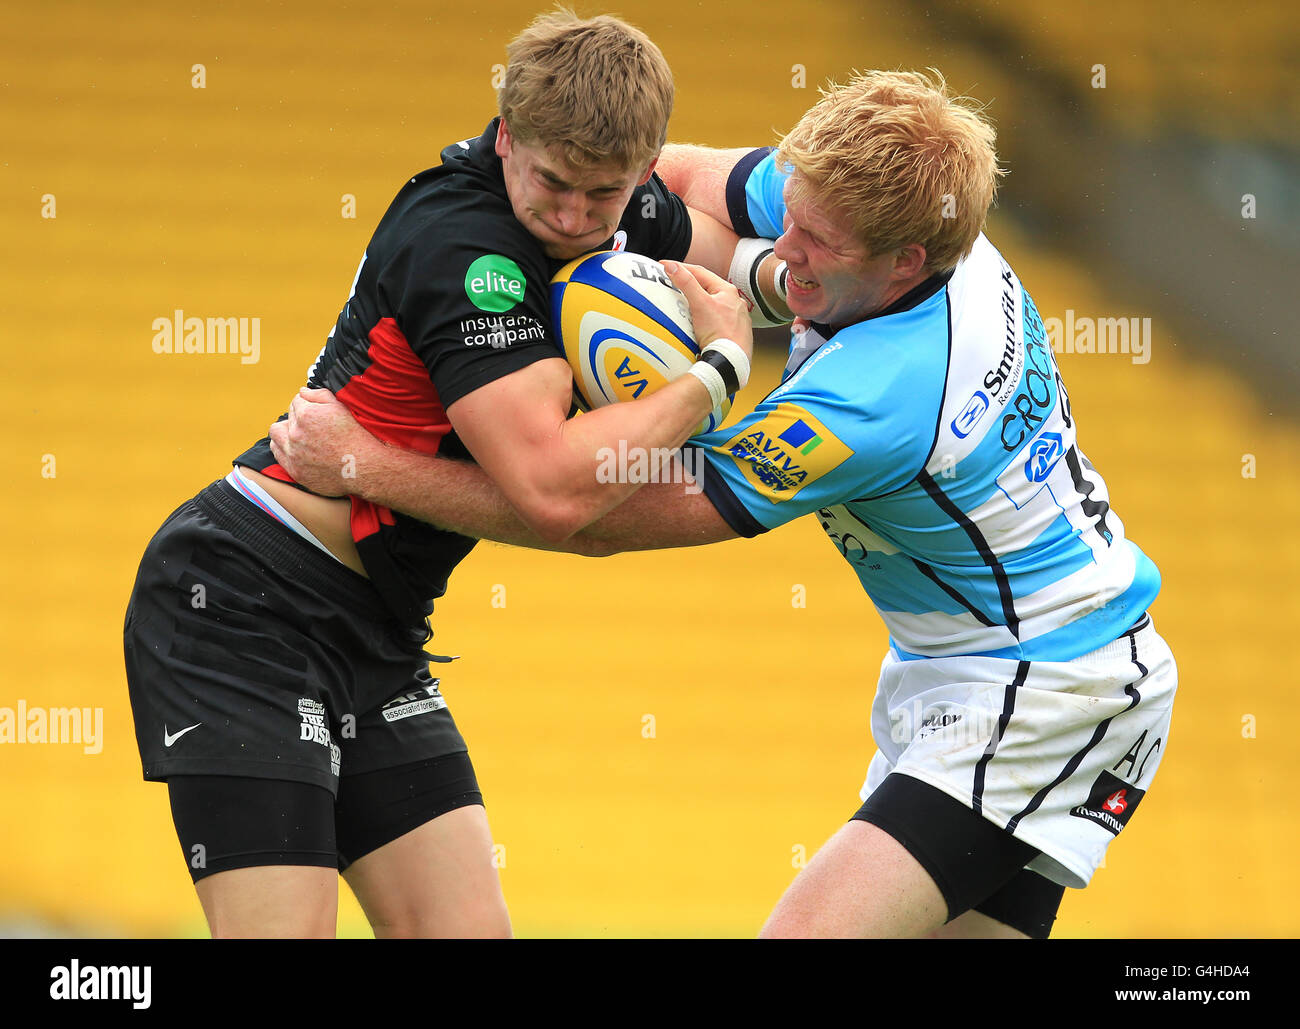 Rugby Union - Aviva Premiership - Saracens v Worcester Warriors - Vicarage Road. Saracens' David Strettle and Worcester Warriors' Alex Crockett (right) wrestle for the ball Stock Photo